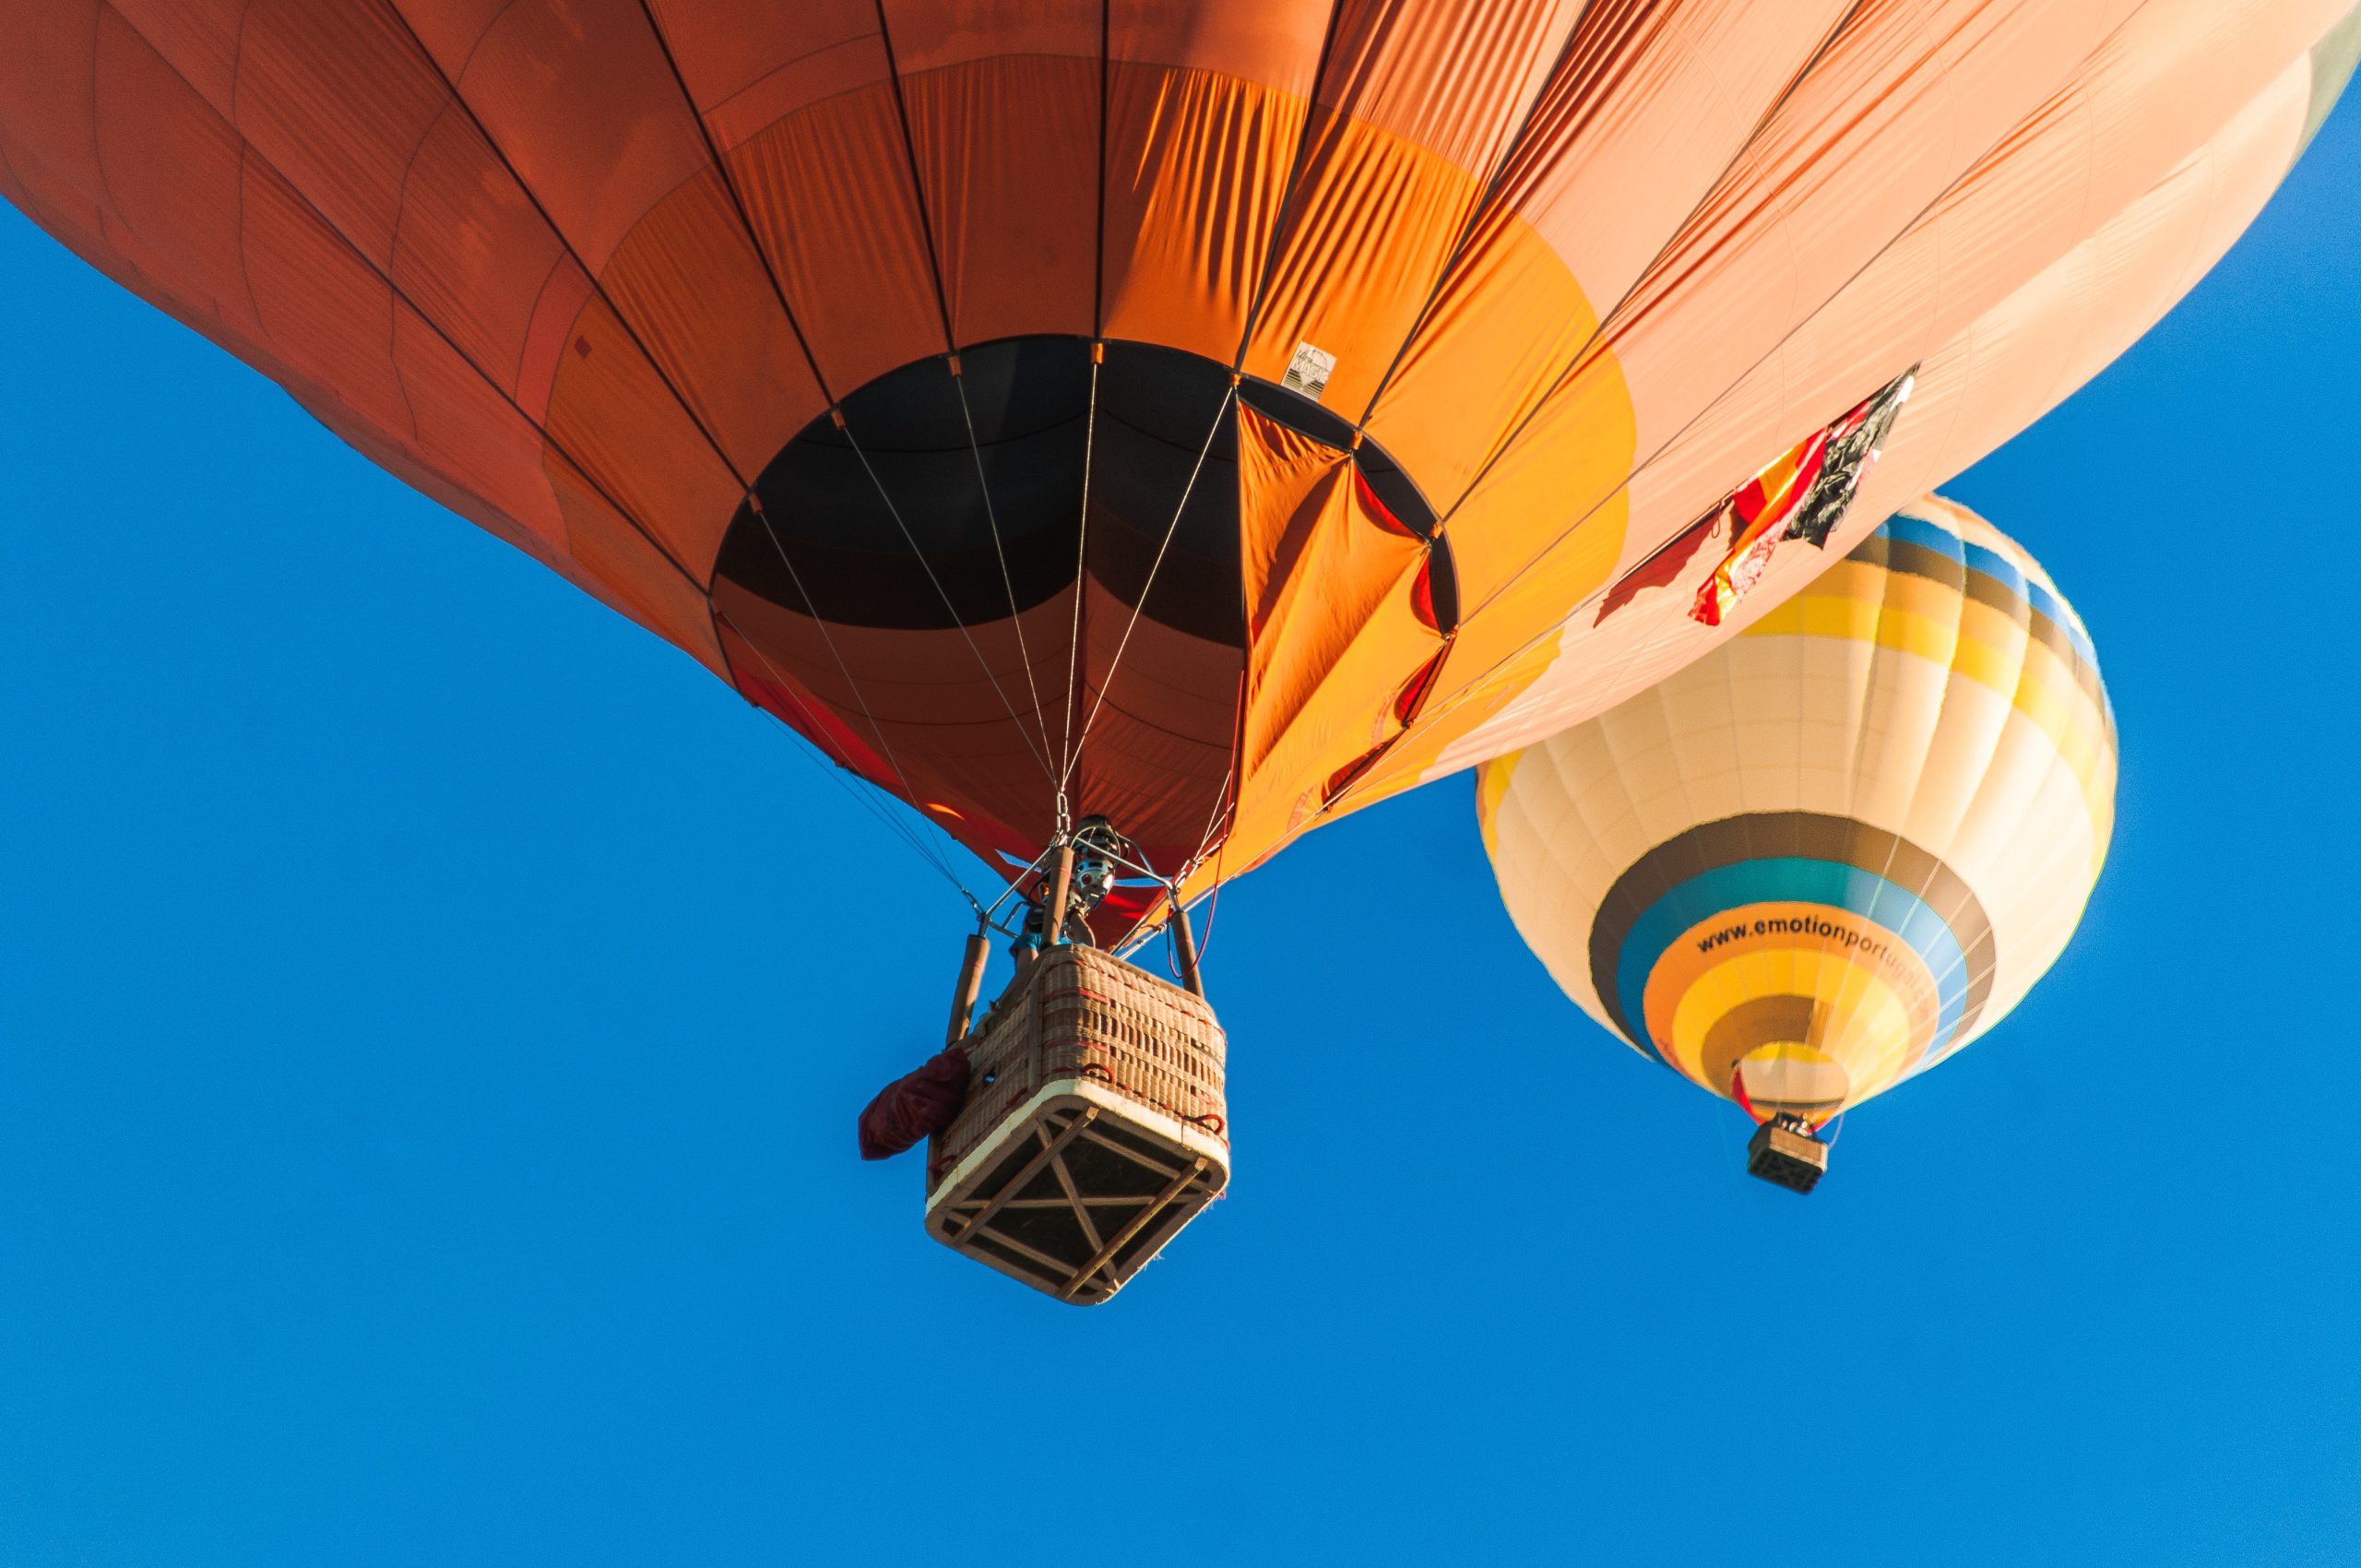 Touring Napa From Above – Hot Air Balloon Rides Over The Valley